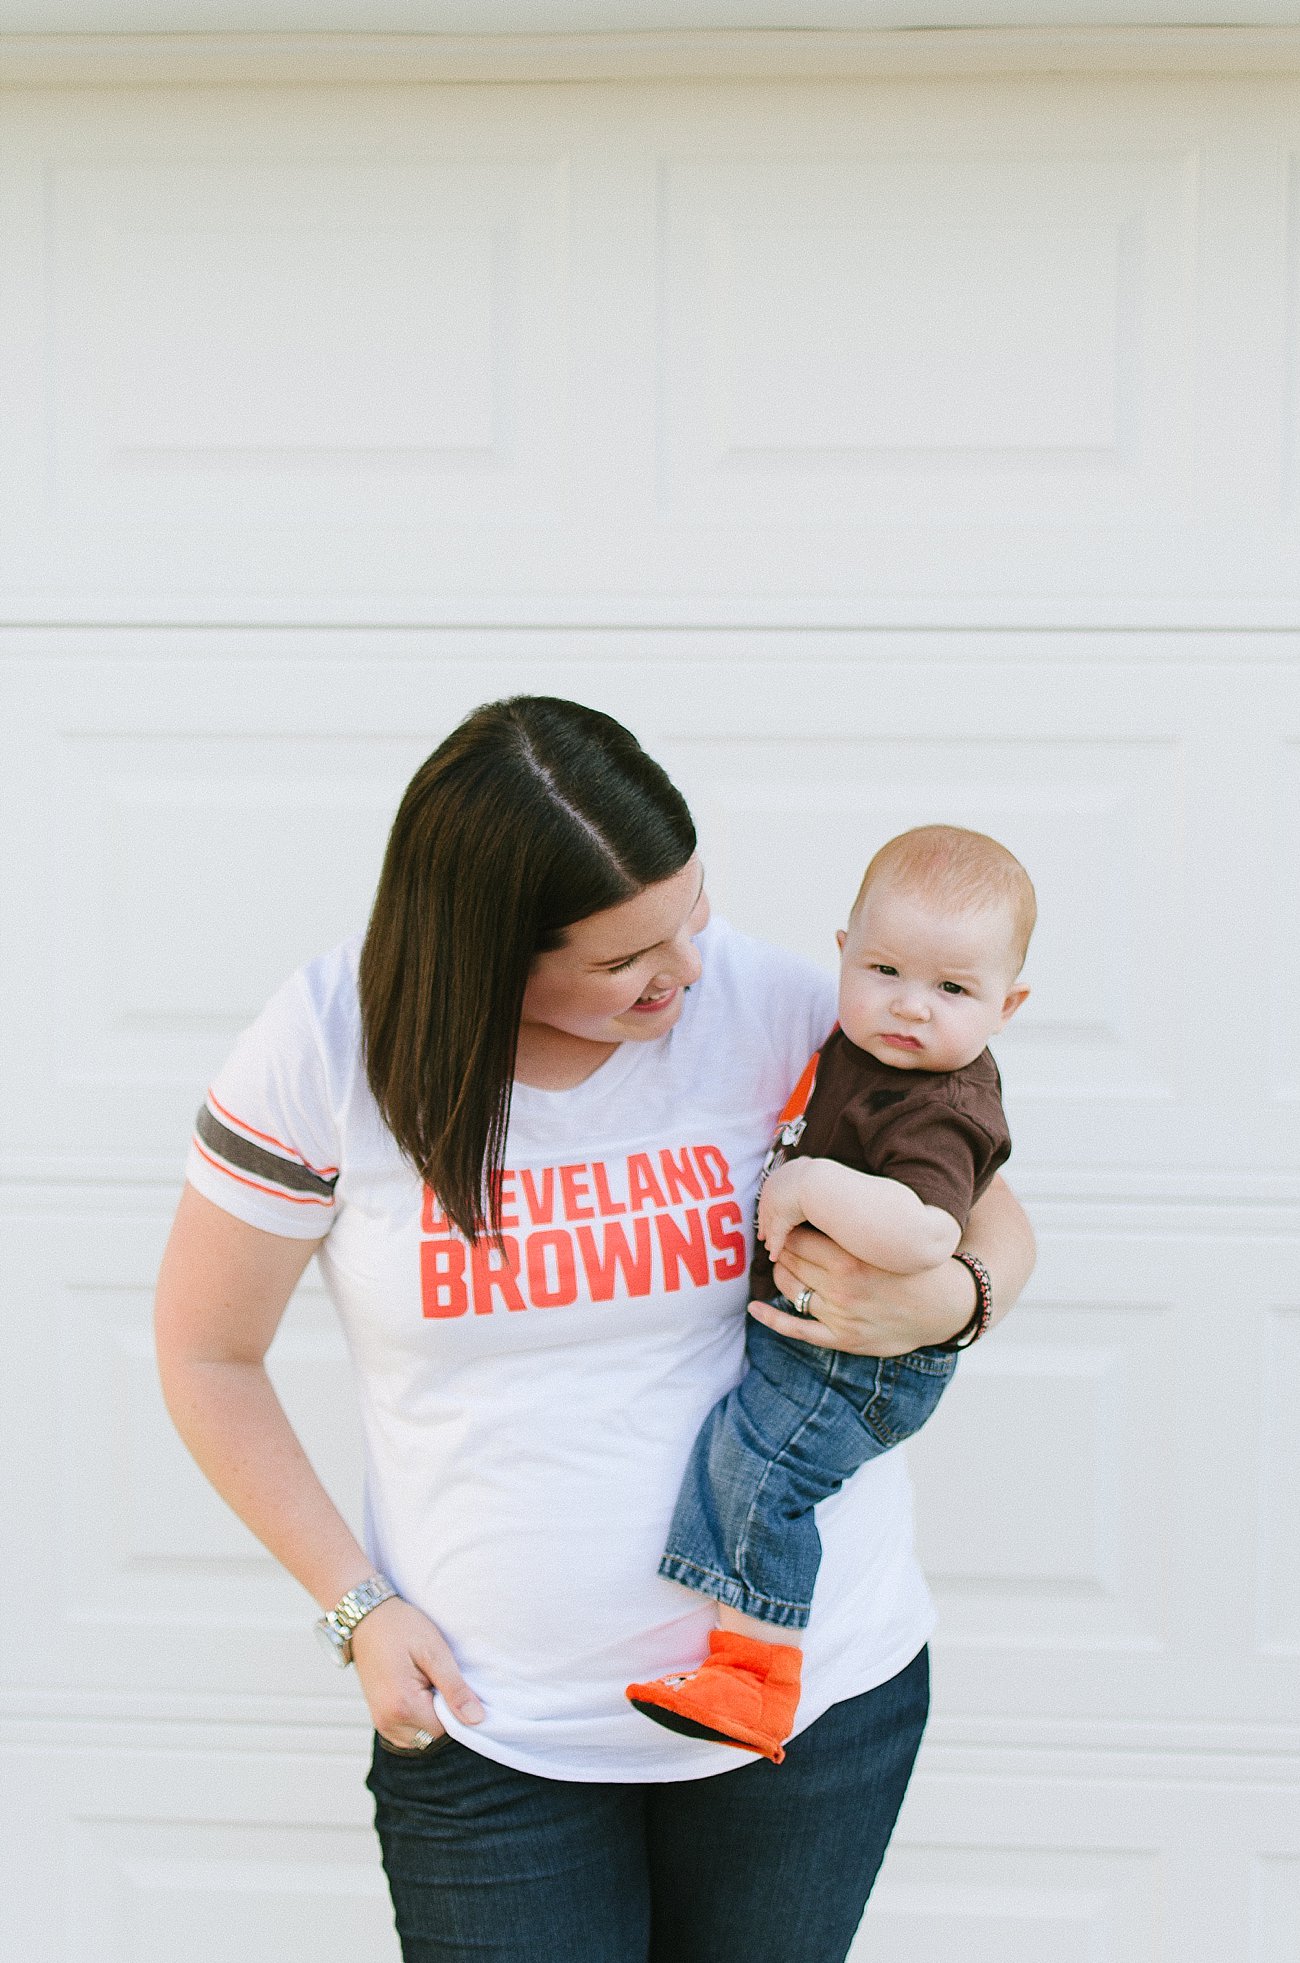 Cleveland Browns NFL Fan Style #NFLfanstyle #cg #ad (6)